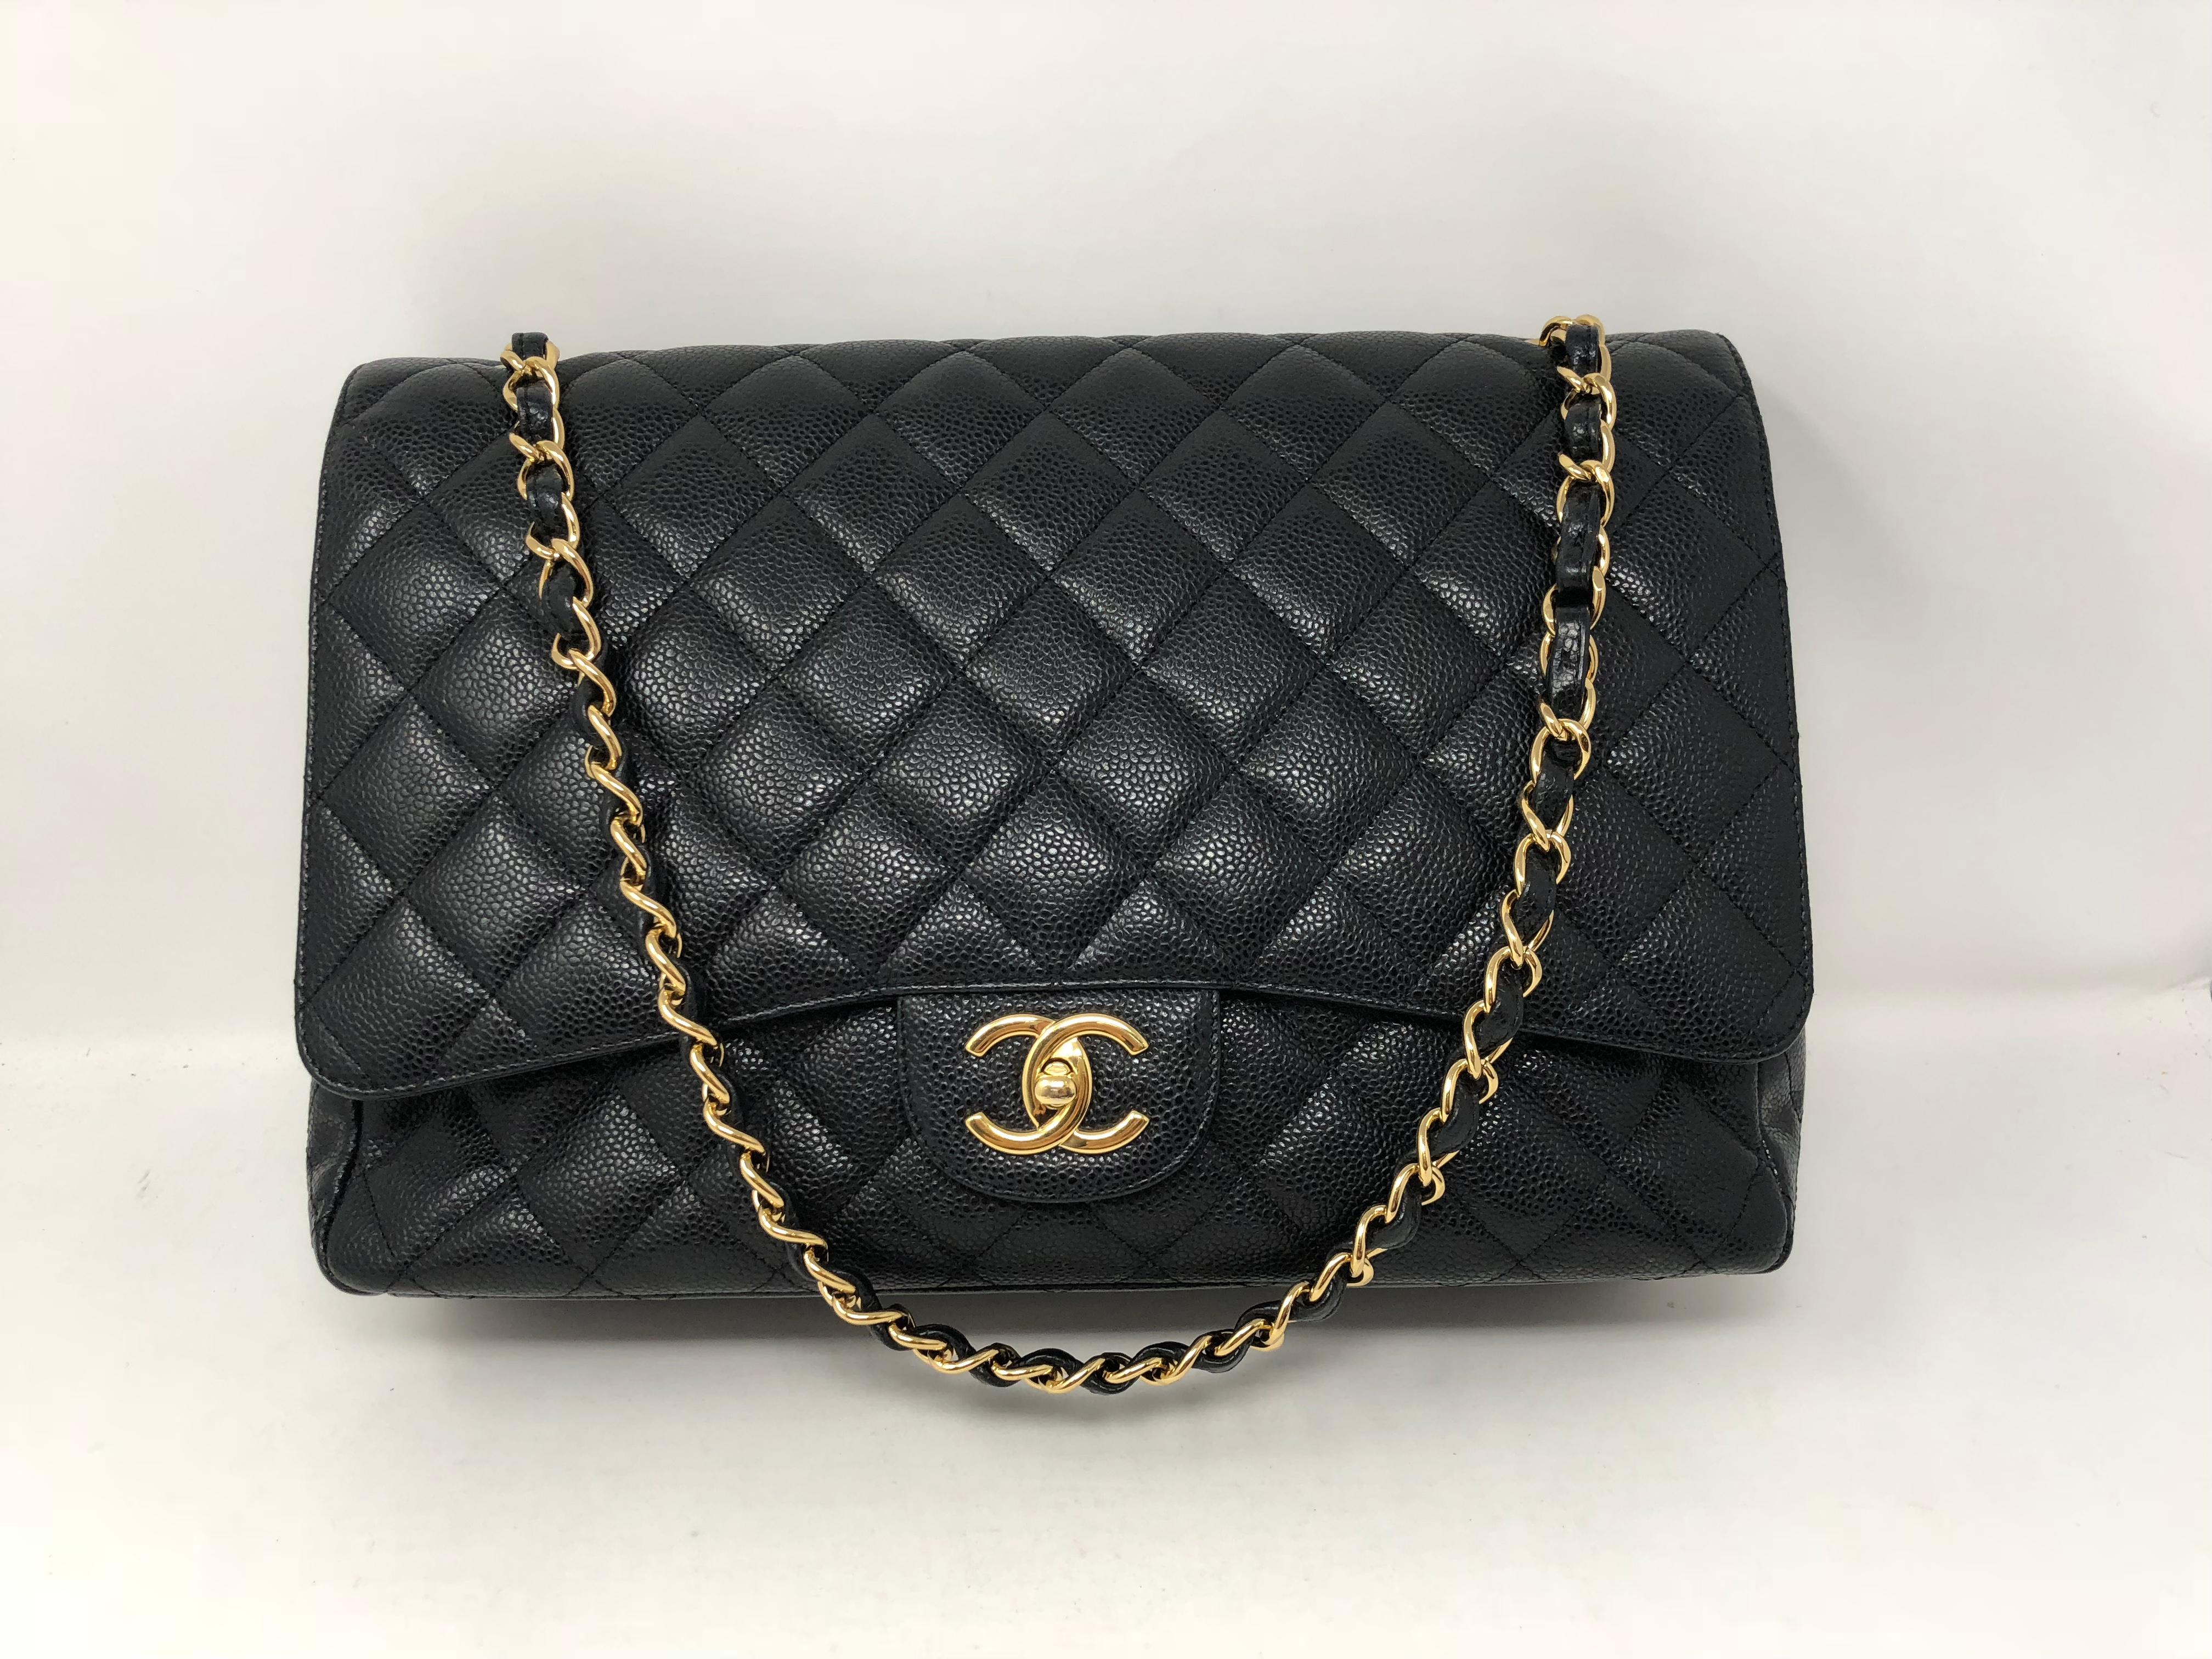 Chanel Black Maxi Caviar leather with gold hardware. Pristine mint condition. Black caviar leather is very durable and highly sought after. This is the largest size of the Classics. Double Flap. From series 16. Guaranteed authentic. Don't miss out